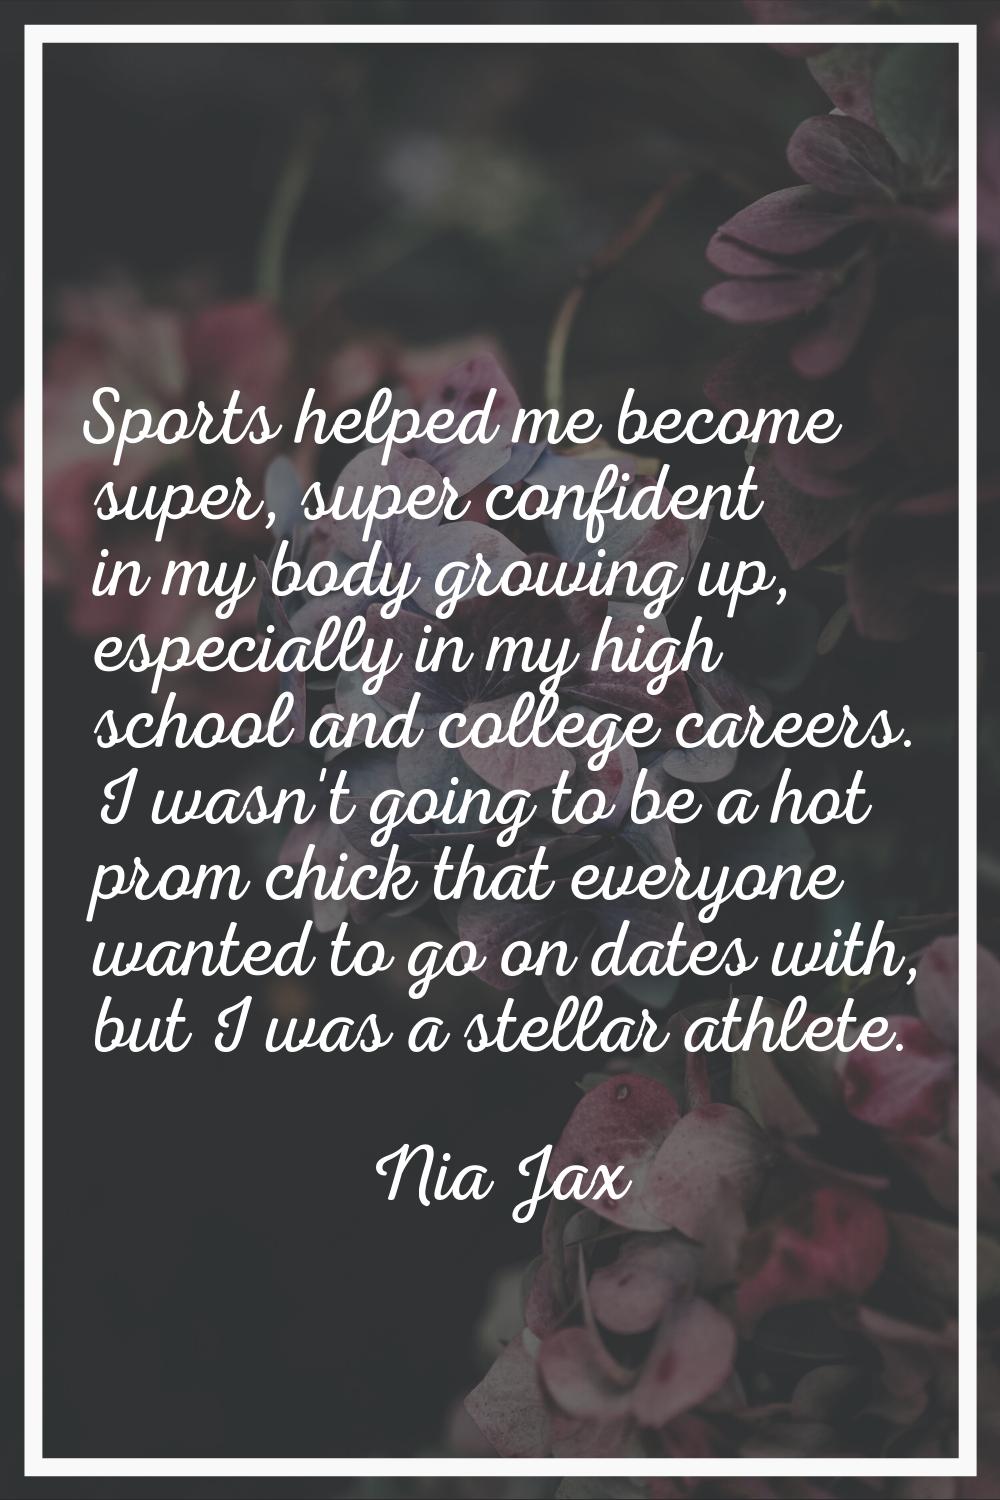 Sports helped me become super, super confident in my body growing up, especially in my high school 